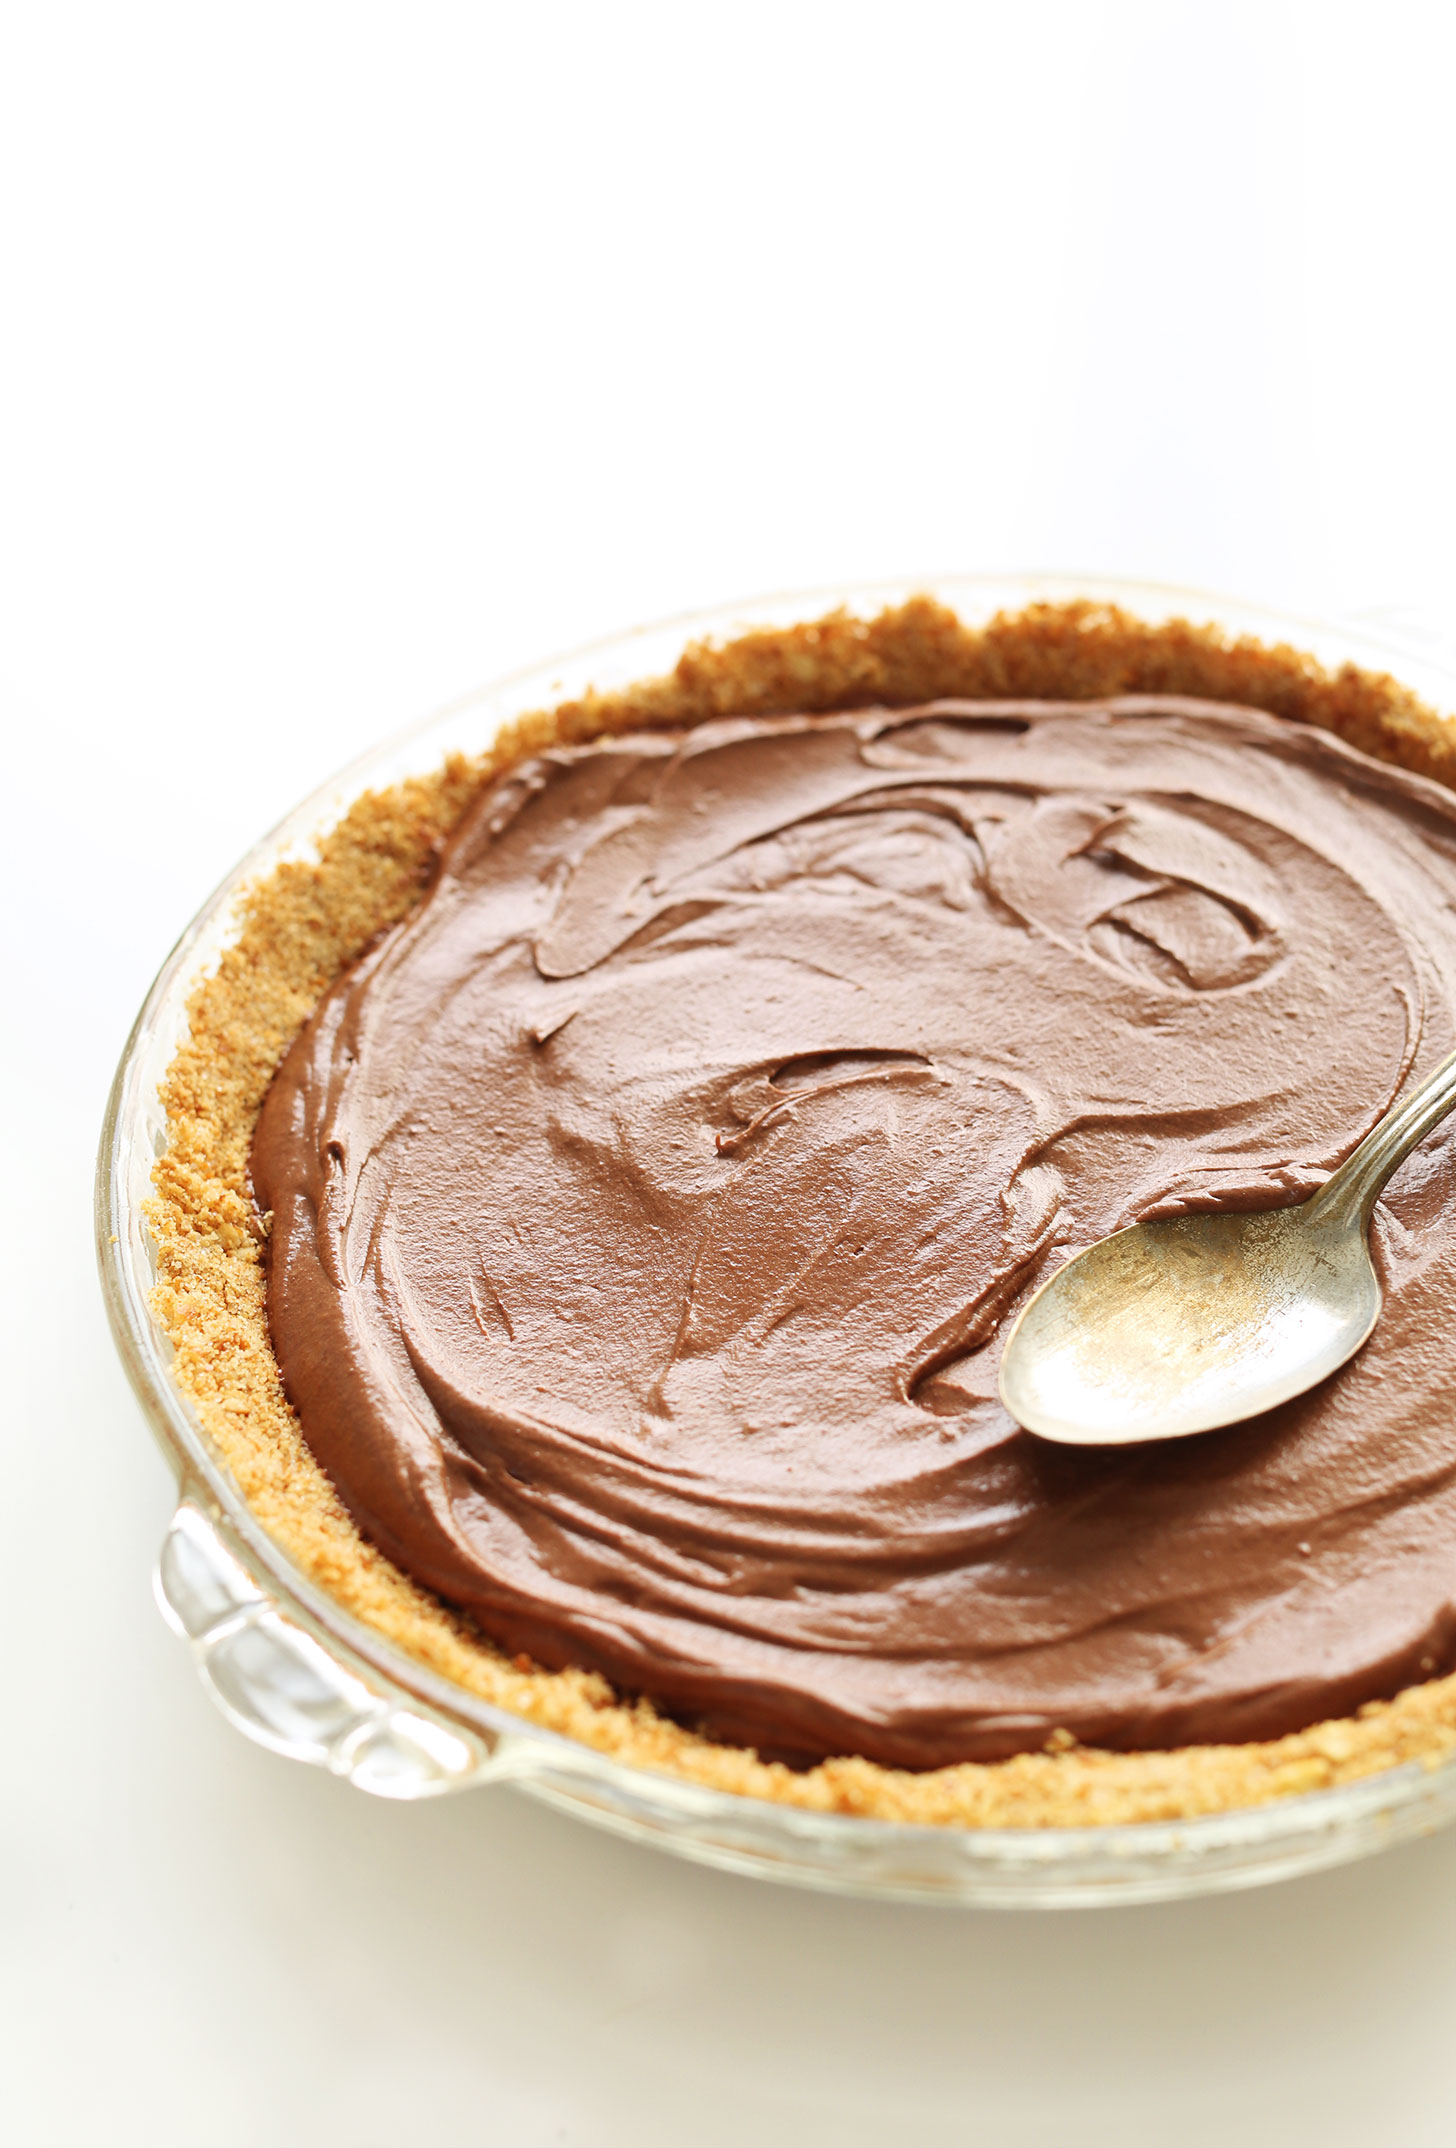 Using the back of a spoon to even out the chocolate filling of our vegan pie